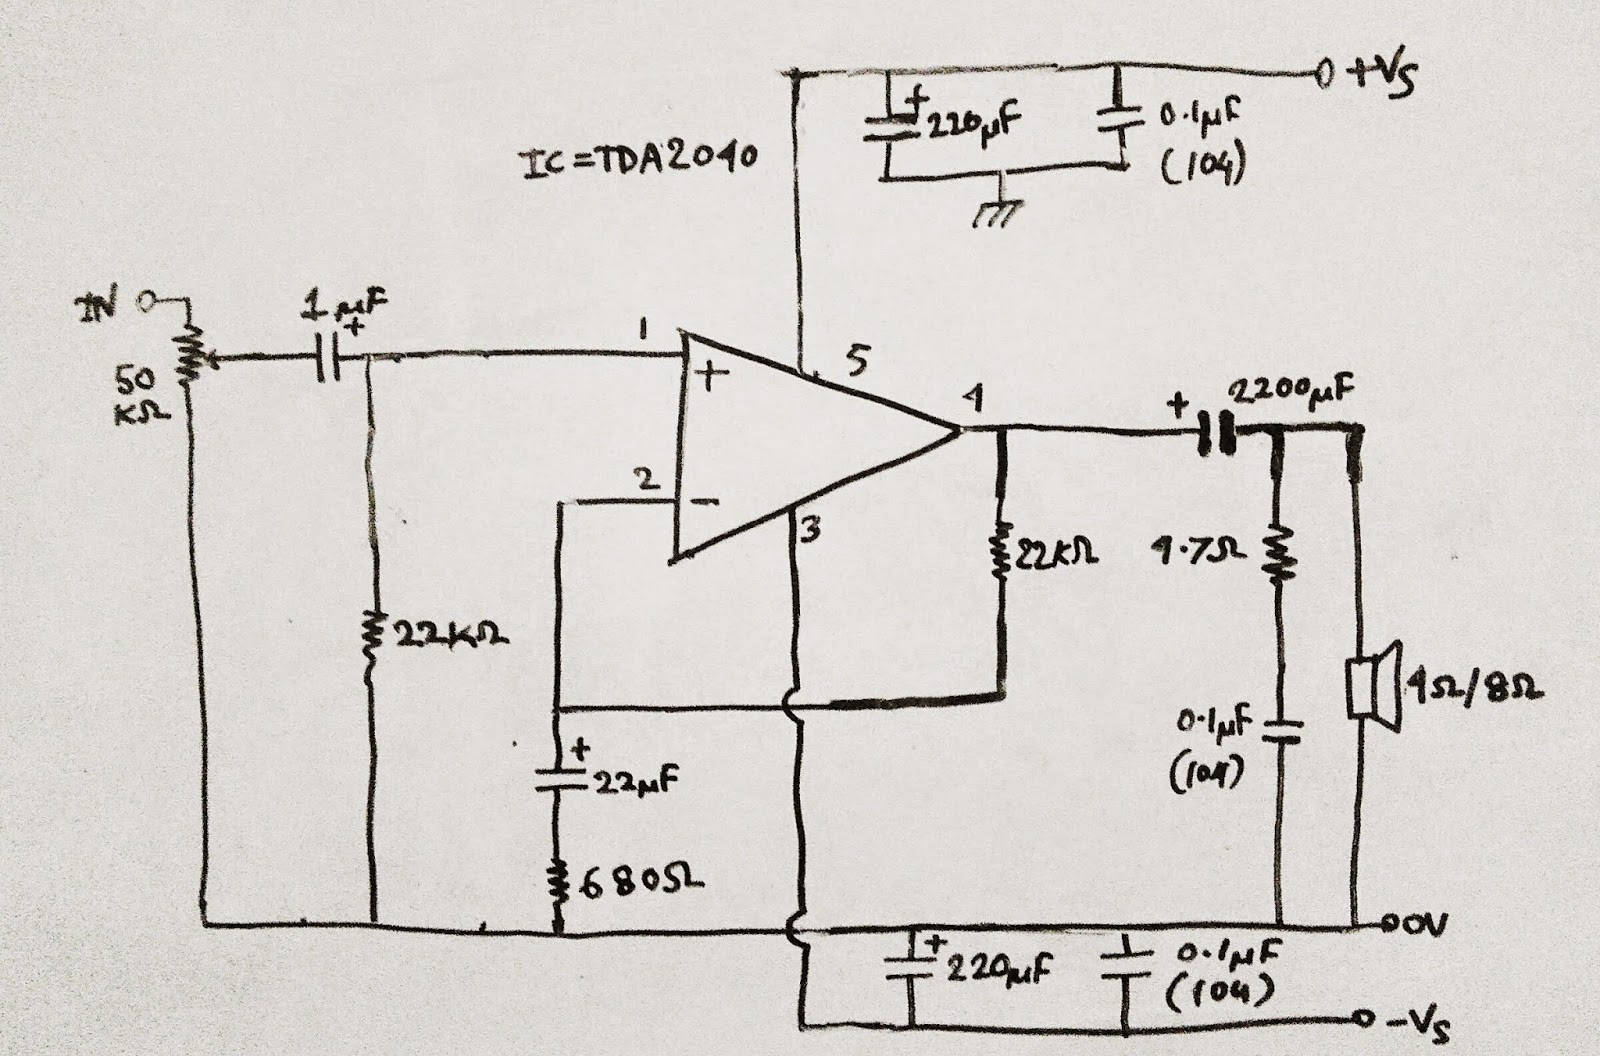 Another Amplifier Using TDA2040